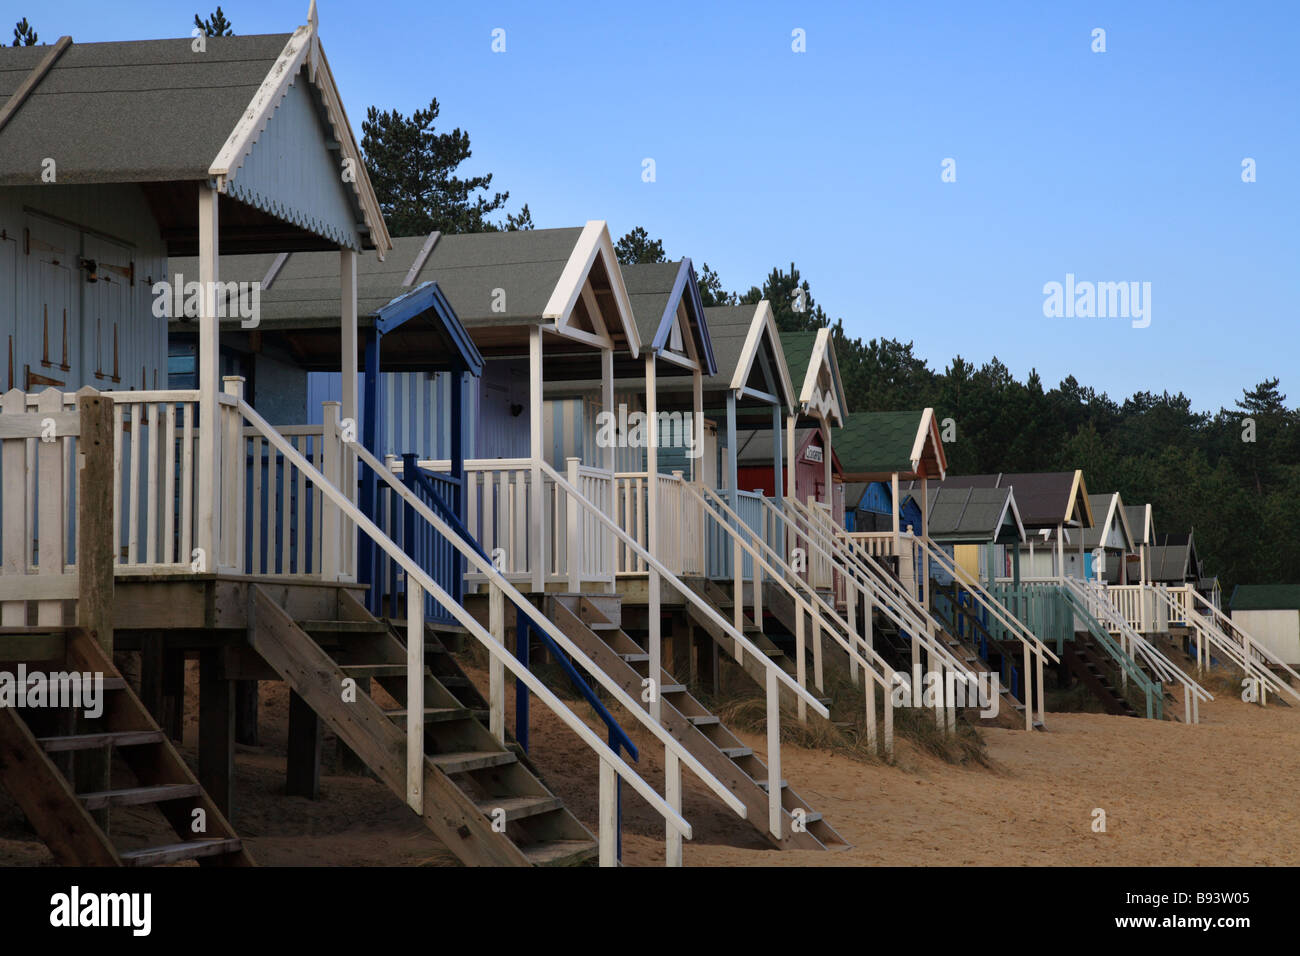 'Beach huts' 'Holkham Bay' North Norfolk. L'East Anglia. Banque D'Images